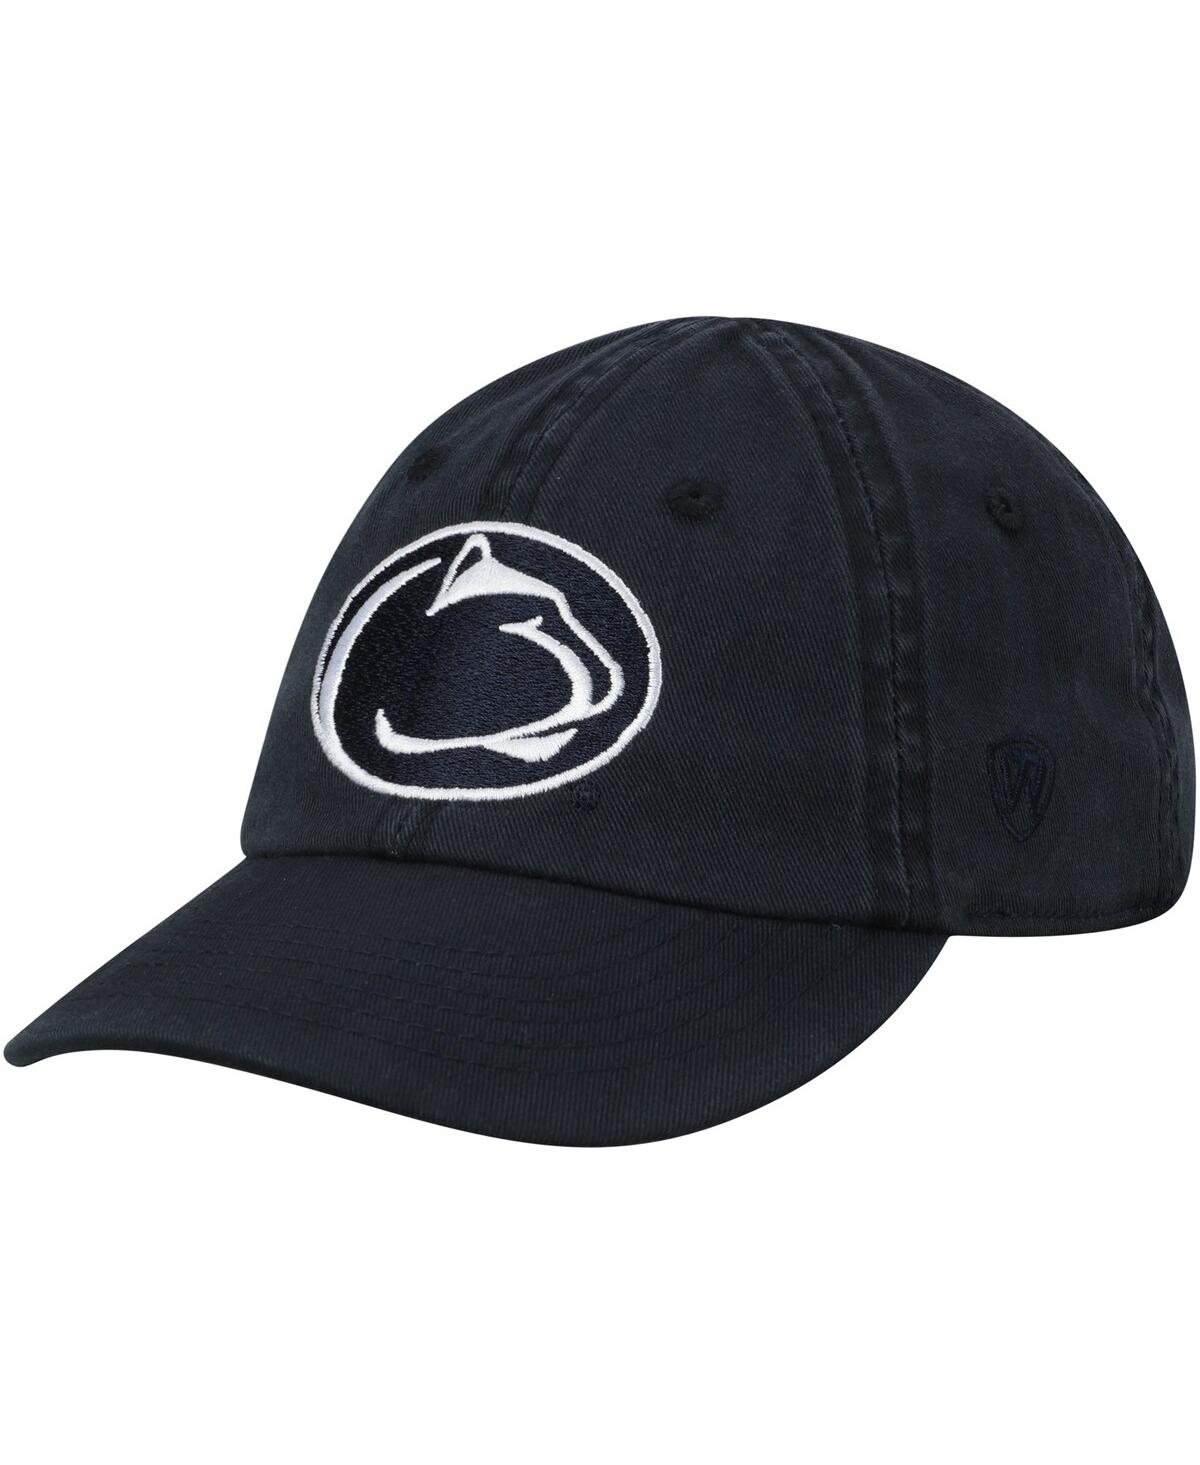 Shop Top Of The World Infant Unisex  Navy Penn State Nittany Lions Mini Me Adjustable Hat